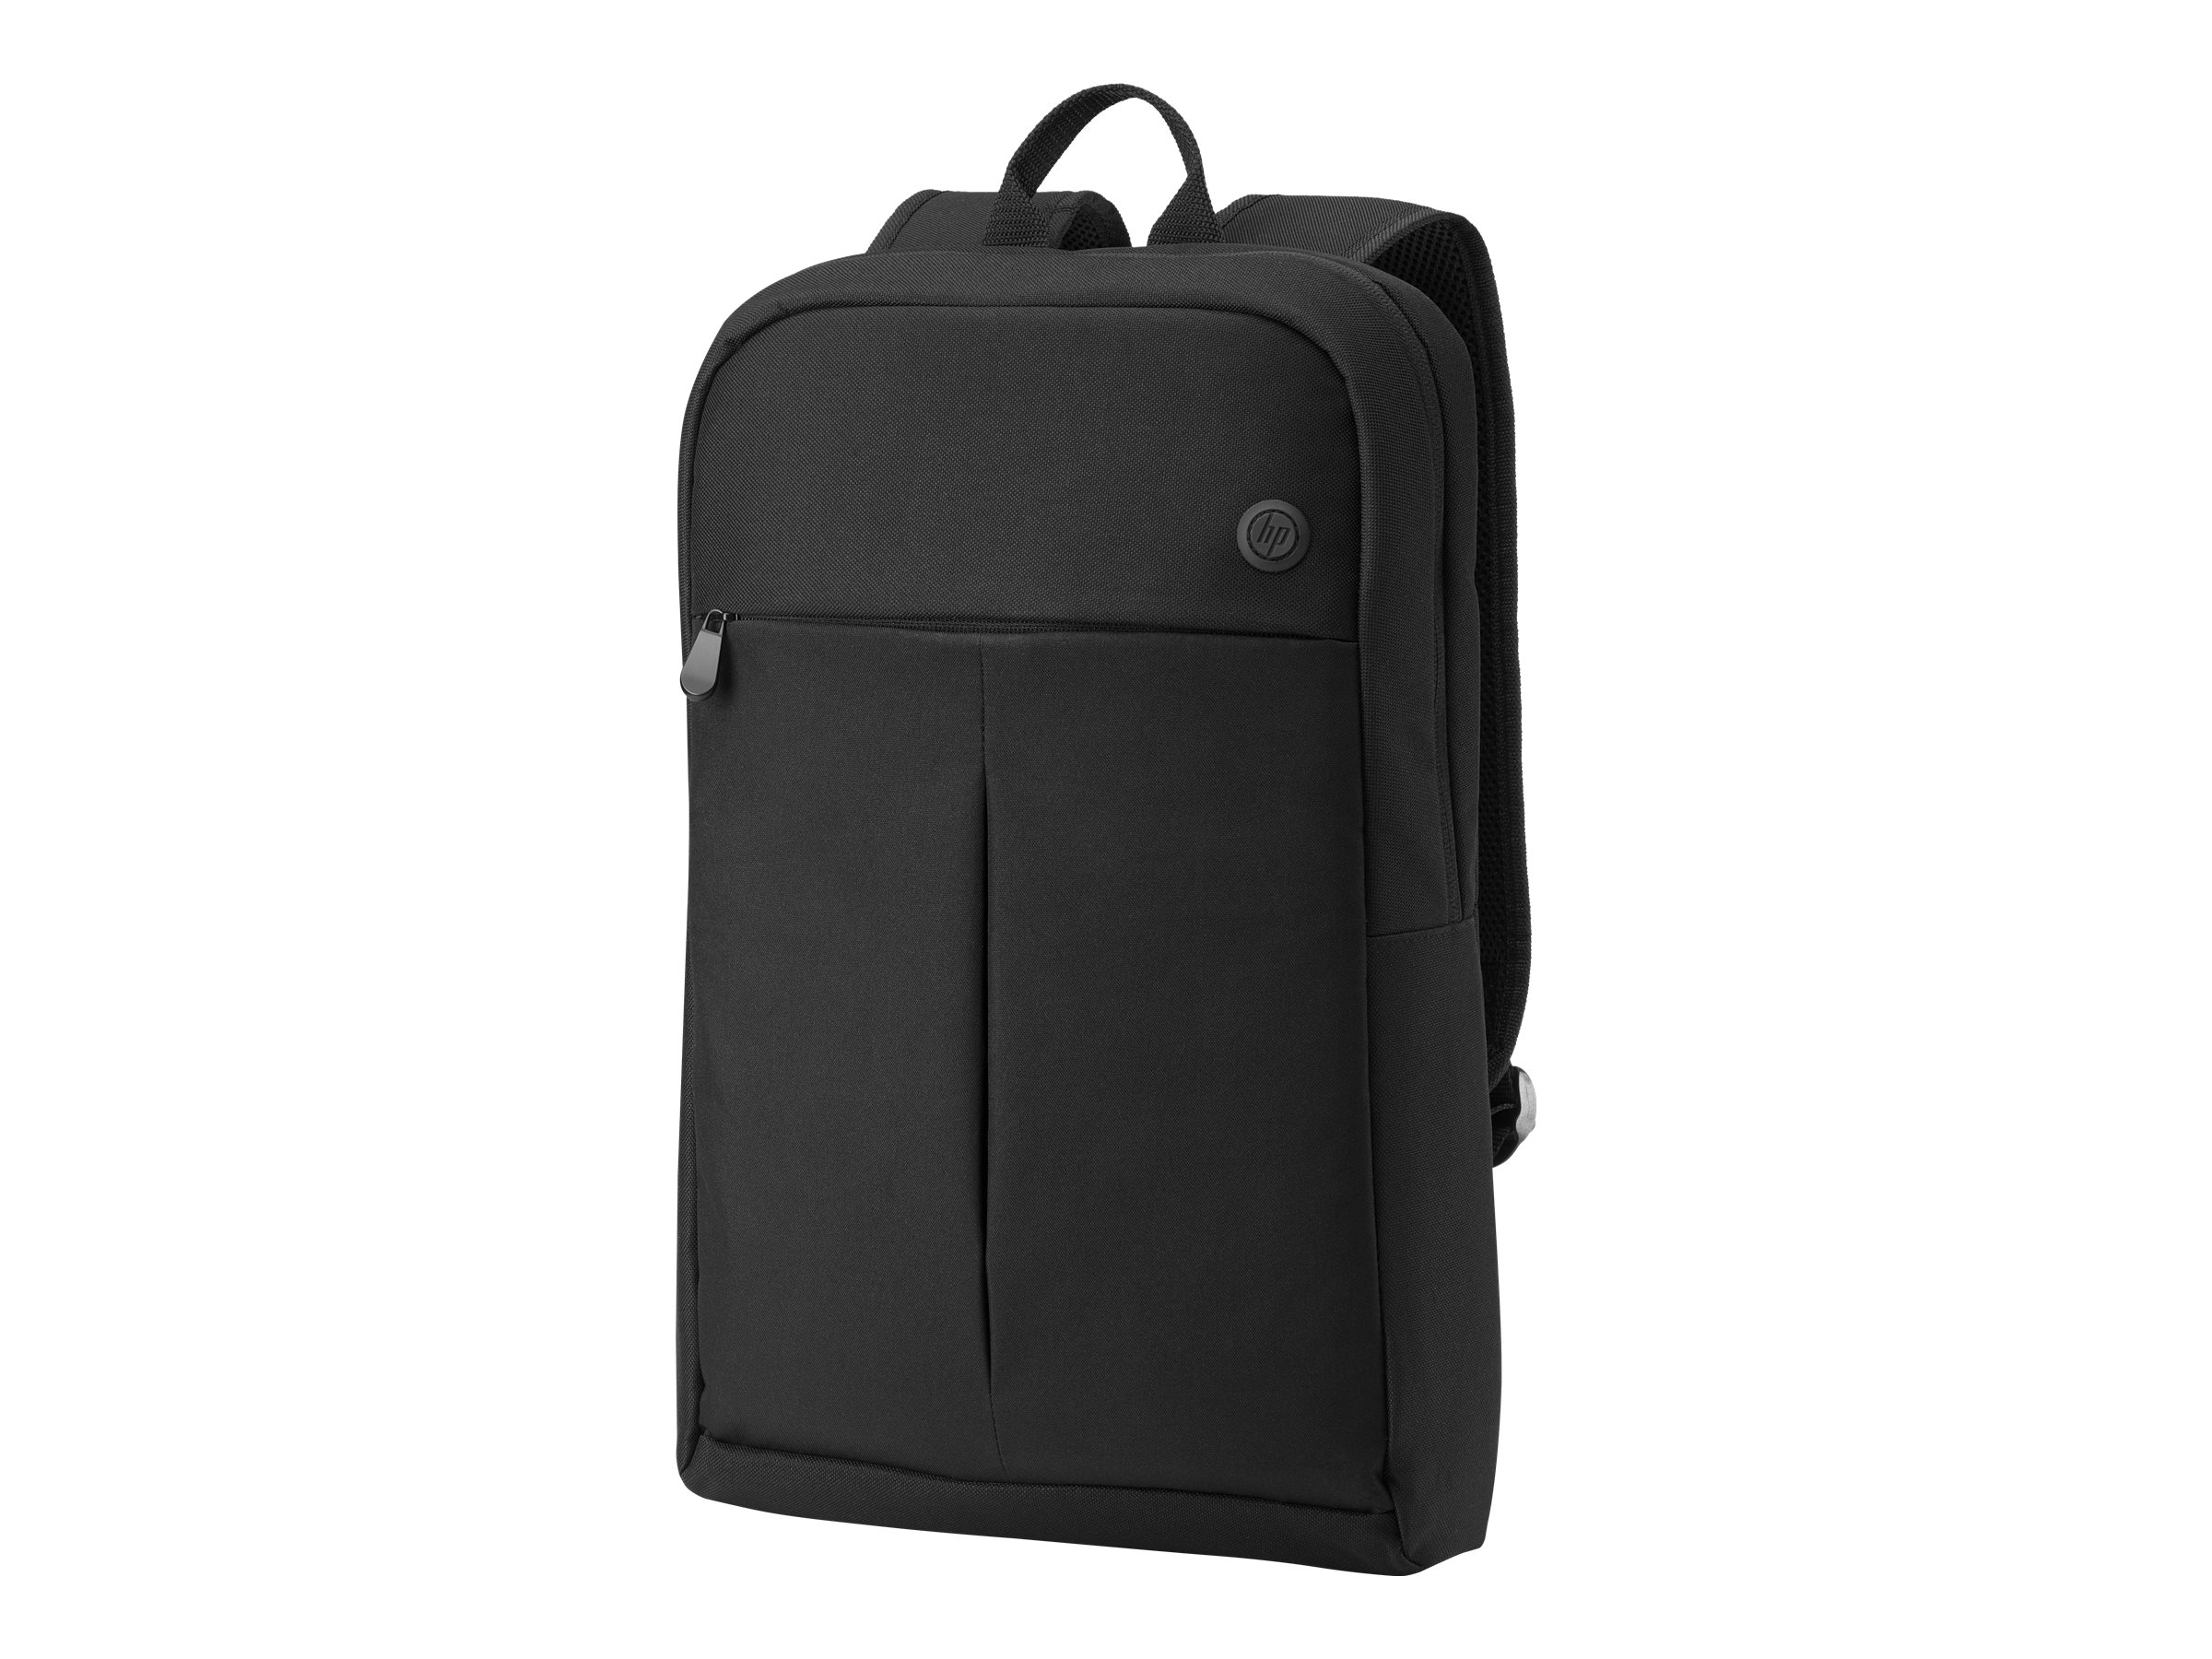 HP Prelude Notebook case - carrying